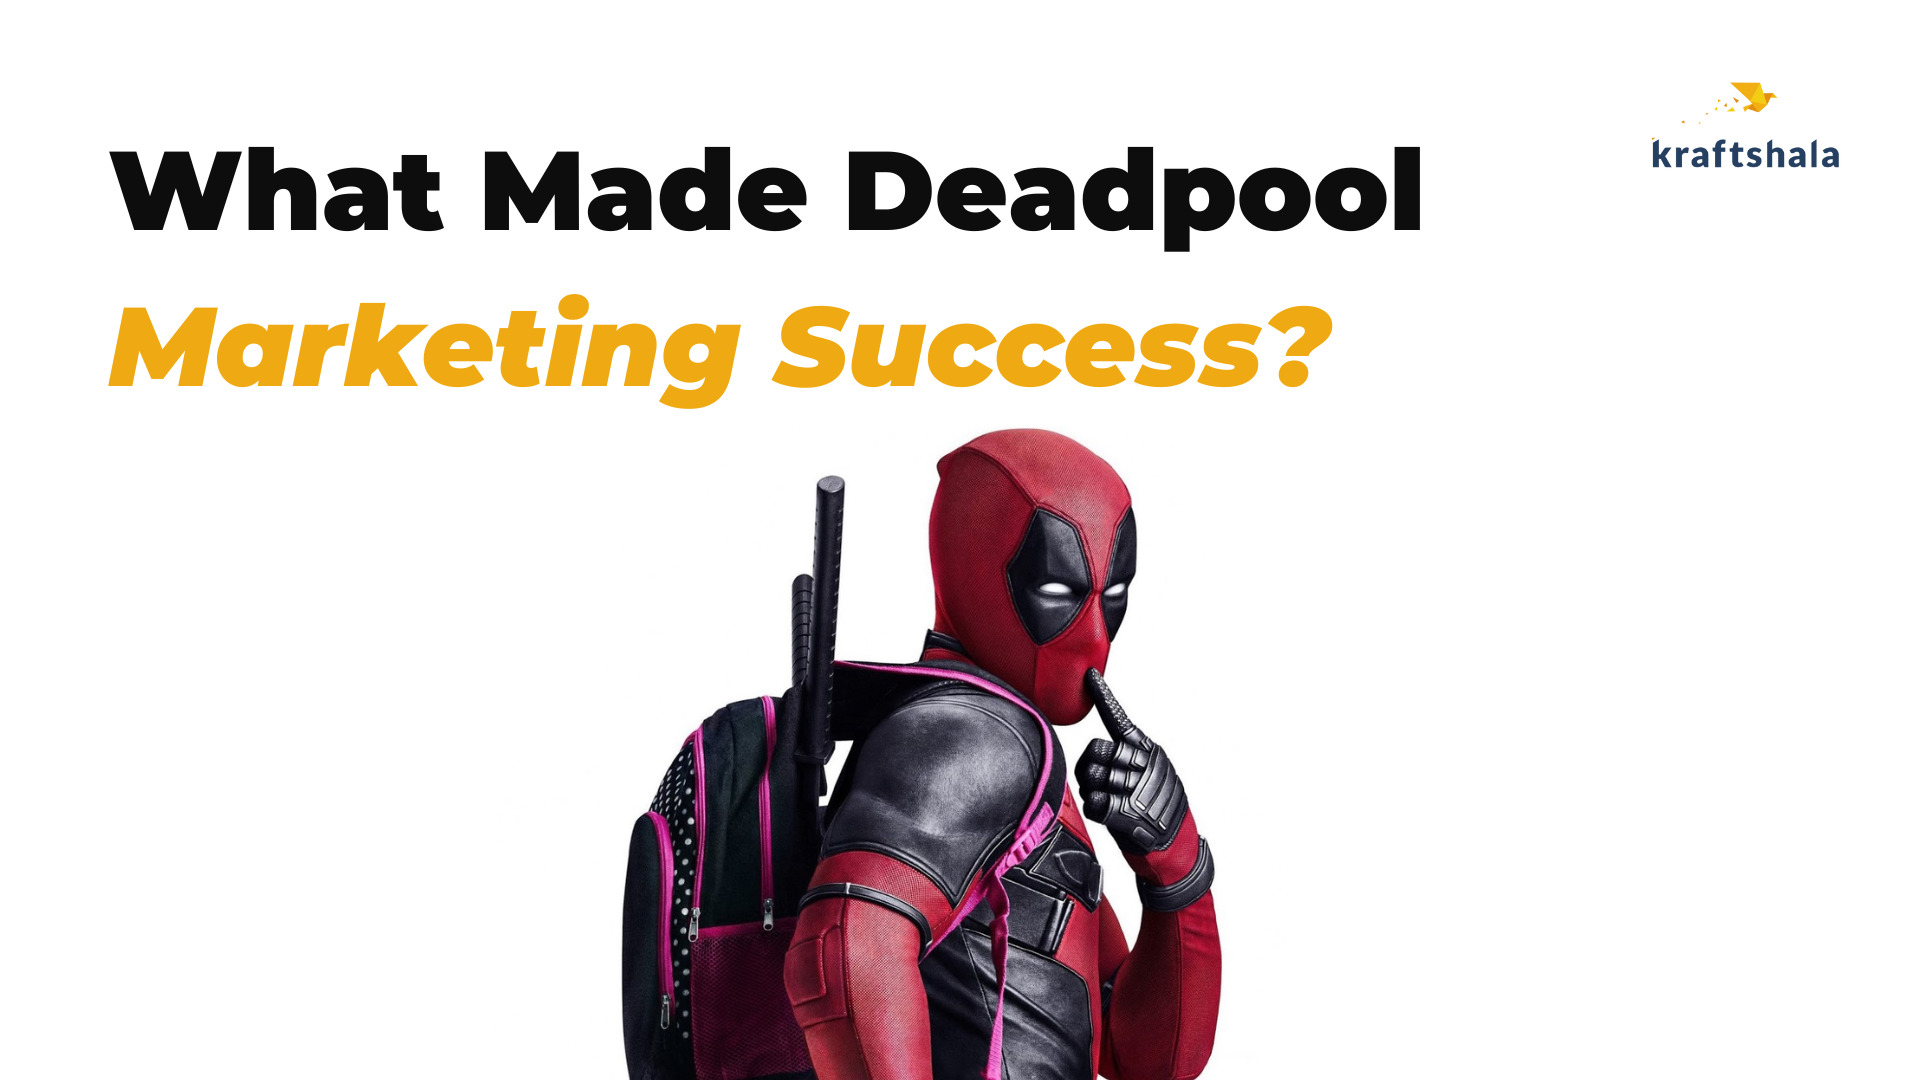 5 Tactics That Made Deadpool’s Marketing Strategy One Of The Greatest Ever